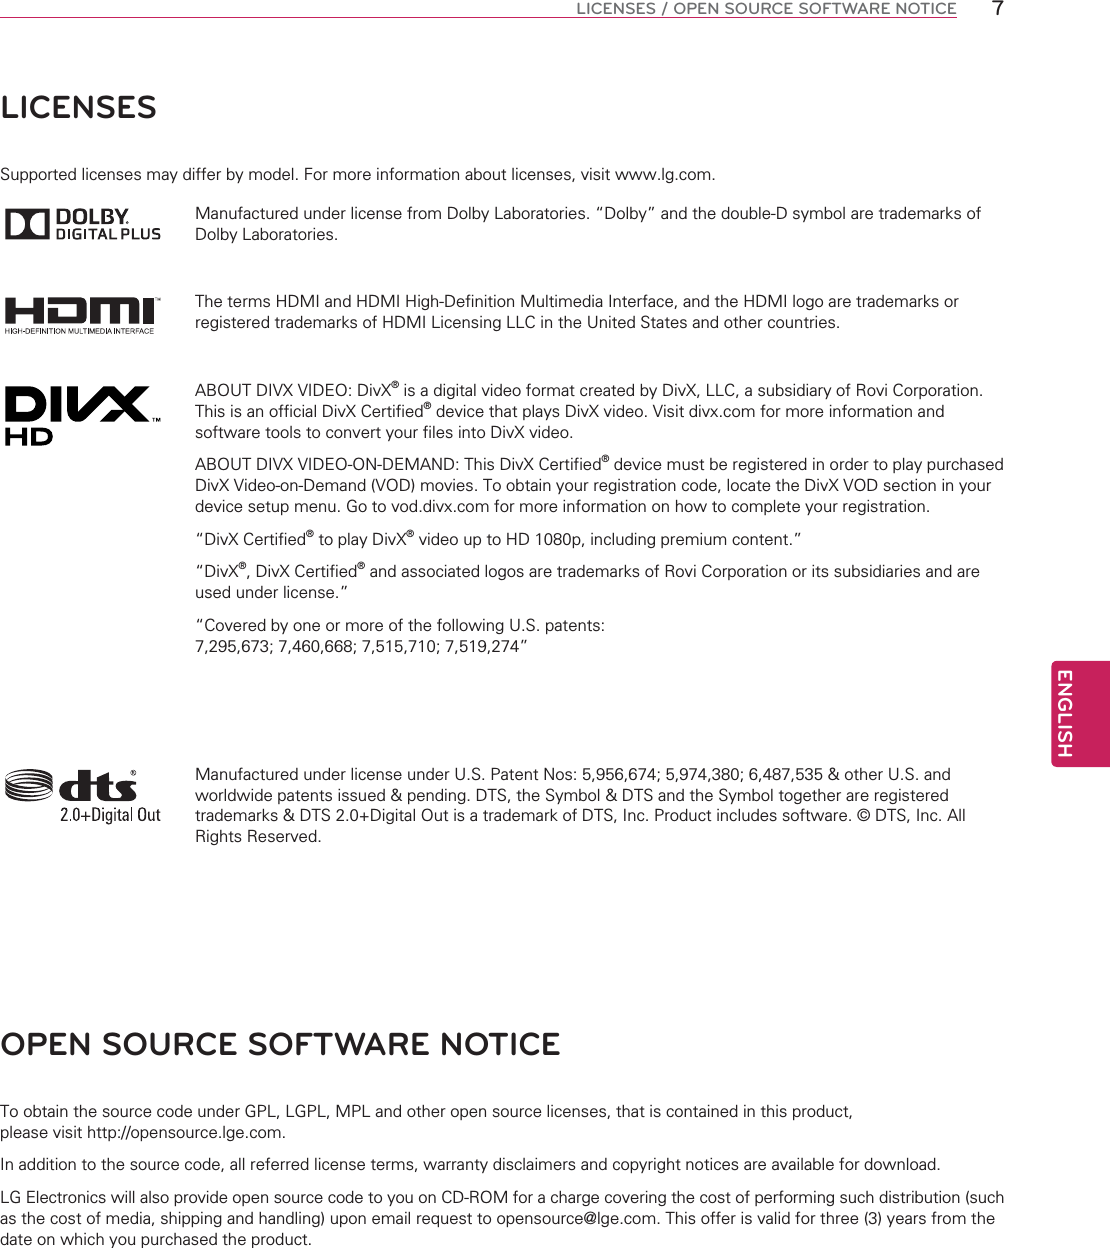 ENGLISH7LICENSES / OPEN SOURCE SOFTWARE NOTICELICENSESSupported licenses may differ by model. For more information about licenses, visit www.lg.com.Manufactured under license from Dolby Laboratories. “Dolby” and the double-D symbol are trademarks of Dolby Laboratories.The terms HDMI and HDMI High-Definition Multimedia Interface, and the HDMI logo are trademarks or registered trademarks of HDMI Licensing LLC in the United States and other countries.ABOUT DIVX VIDEO: DivX® is a digital video format created by DivX, LLC, a subsidiary of Rovi Corporation. This is an official DivX Certified® device that plays DivX video. Visit divx.com for more information and software tools to convert your files into DivX video.ABOUT DIVX VIDEO-ON-DEMAND: This DivX Certified® device must be registered in order to play purchased DivX Video-on-Demand (VOD) movies. To obtain your registration code, locate the DivX VOD section in your device setup menu. Go to vod.divx.com for more information on how to complete your registration. “DivX Certified® to play DivX® video up to HD 1080p, including premium content.”“DivX®, DivX Certified® and associated logos are trademarks of Rovi Corporation or its subsidiaries and are used under license.”“Covered by one or more of the following U.S. patents: 7,295,673; 7,460,668; 7,515,710; 7,519,274”Manufactured under license under U.S. Patent Nos: 5,956,674; 5,974,380; 6,487,535 &amp; other U.S. and worldwide patents issued &amp; pending. DTS, the Symbol &amp; DTS and the Symbol together are registered trademarks &amp; DTS 2.0+Digital Out is a trademark of DTS, Inc. Product includes software. © DTS, Inc. All Rights Reserved.OPEN SOURCE SOFTWARE NOTICETo obtain the source code under GPL, LGPL, MPL and other open source licenses, that is contained in this product,  please visit http://opensource.lge.com.In addition to the source code, all referred license terms, warranty disclaimers and copyright notices are available for download.LG Electronics will also provide open source code to you on CD-ROM for a charge covering the cost of performing such distribution (such as the cost of media, shipping and handling) upon email request to opensource@lge.com. This offer is valid for three (3) years from the date on which you purchased the product.